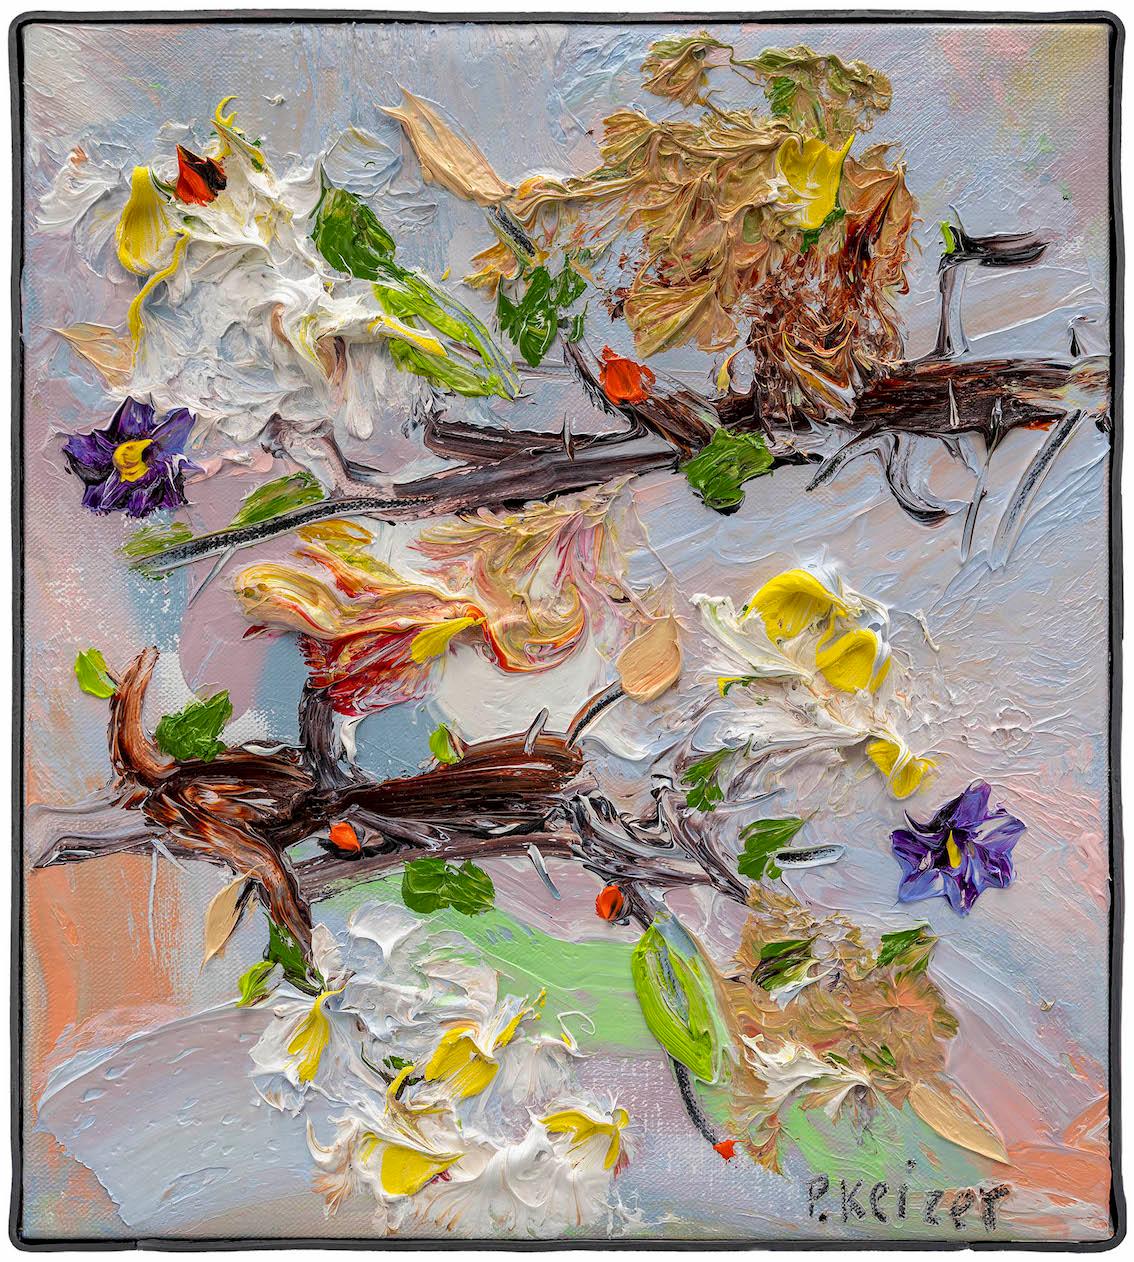 "Together, oil painting of flowers by Peter Keizer.

Peter Keizer is a Dutch painter and sculptor, born in 1961. He studied at the Rijksakademie in Amsterdam and began working as a professional artist following his graduation from the Royal College